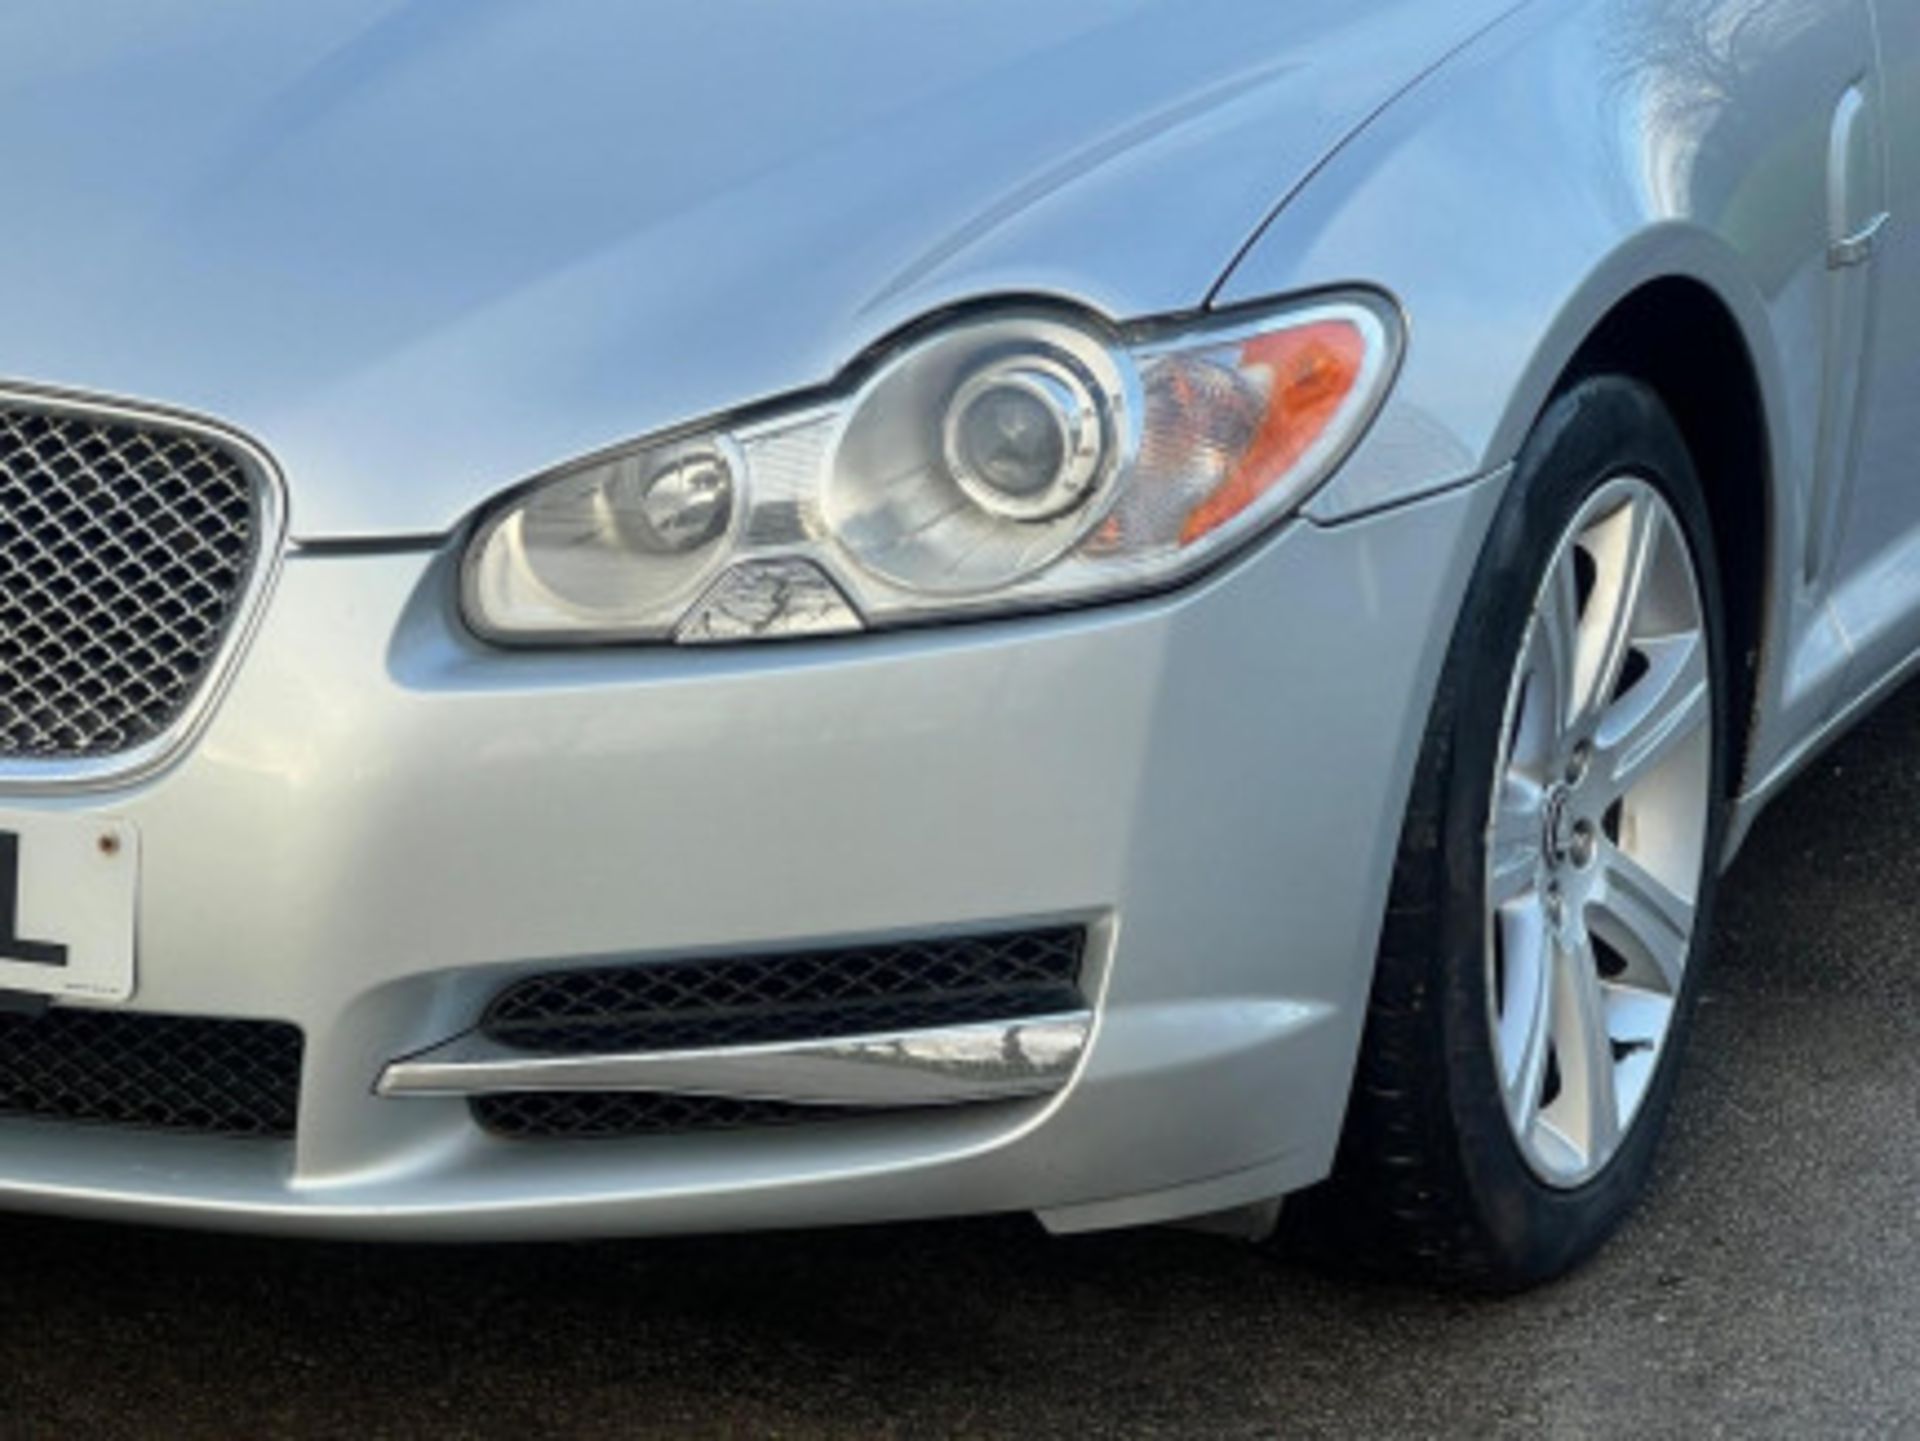 LUXURIOUS JAGUAR XF 3.0D V6 LUXURY 4DR AUTOMATIC SALOON >>--NO VAT ON HAMMER--<< - Image 25 of 80